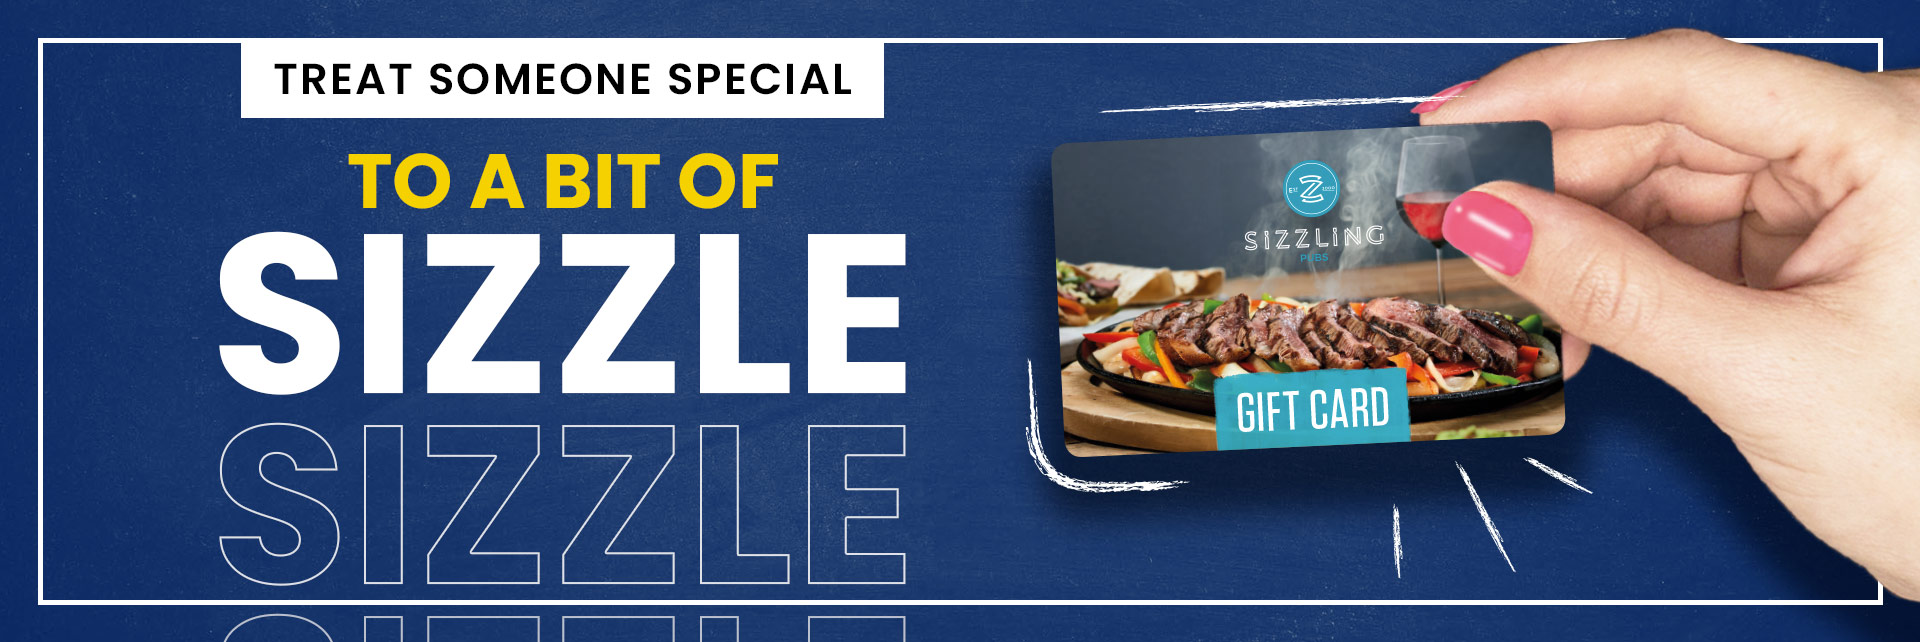 Sizzling Pubs Gift Card at Cleveland Arms in Wolverhampton